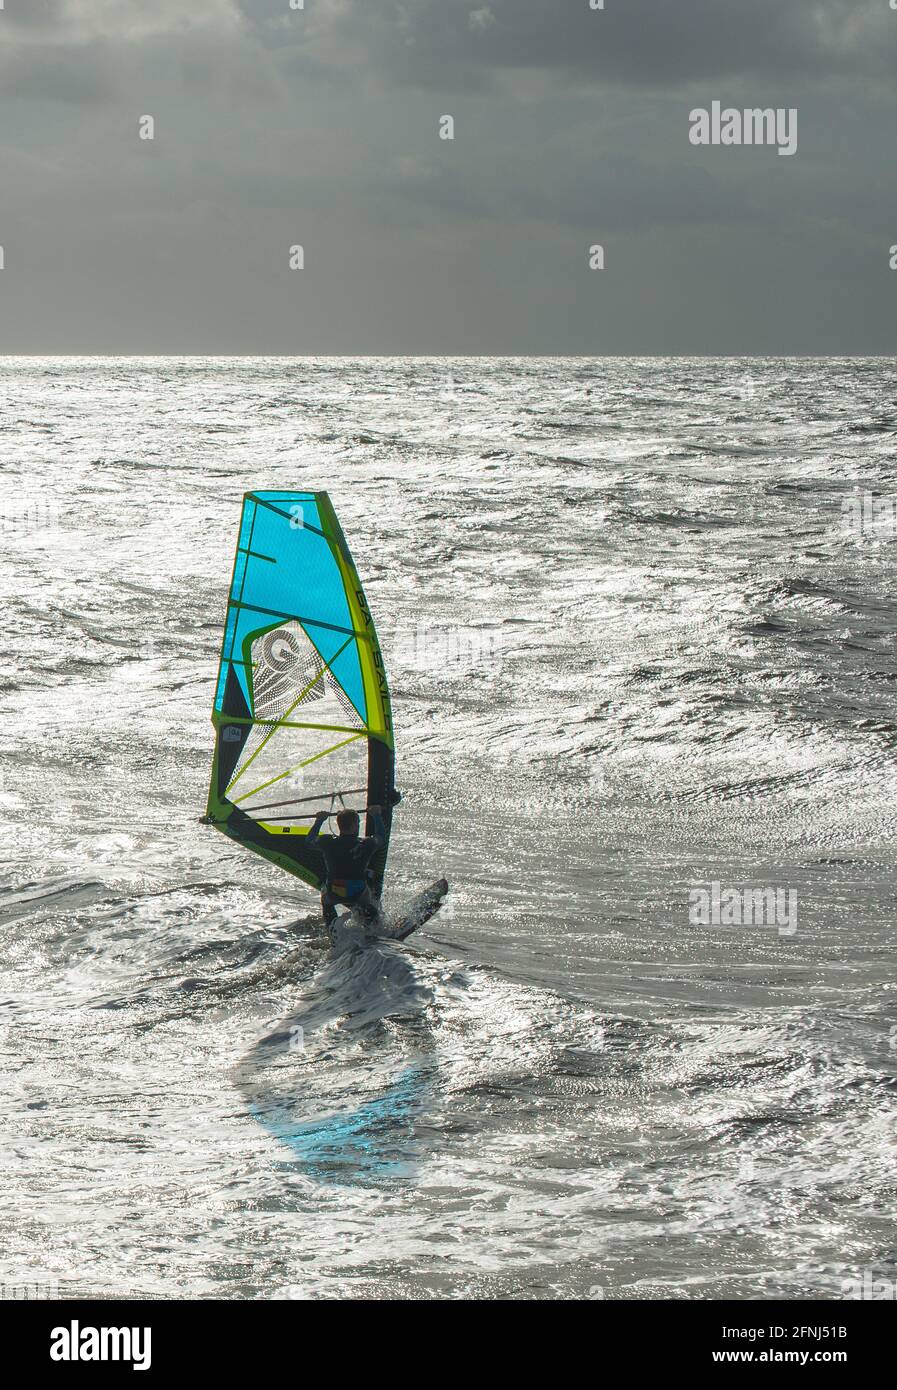 Striking image of a single windsurfer with blue sail speeding along with a dark sky background set against a silvery sea Stock Photo